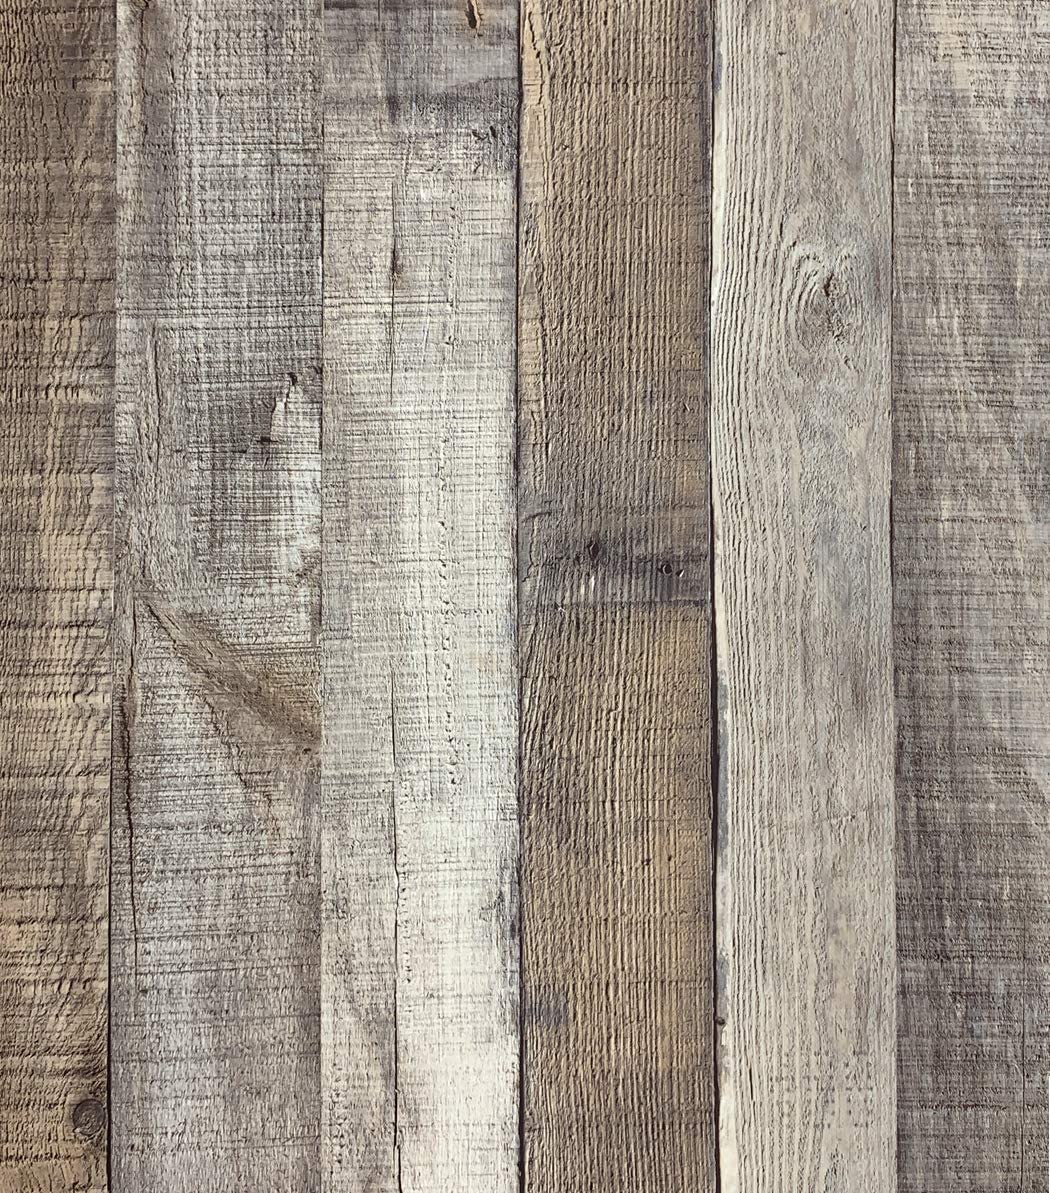 Distressed Wood Wallpaper Peel and Stick Wallpaper 17.71” x 118” Self Adhesive Wood Wallpaper Reclaimed Vintage Faux Plank Look Wood Film Shiplap Cabinet Vinyl Removable Decorative Home, Everything Else